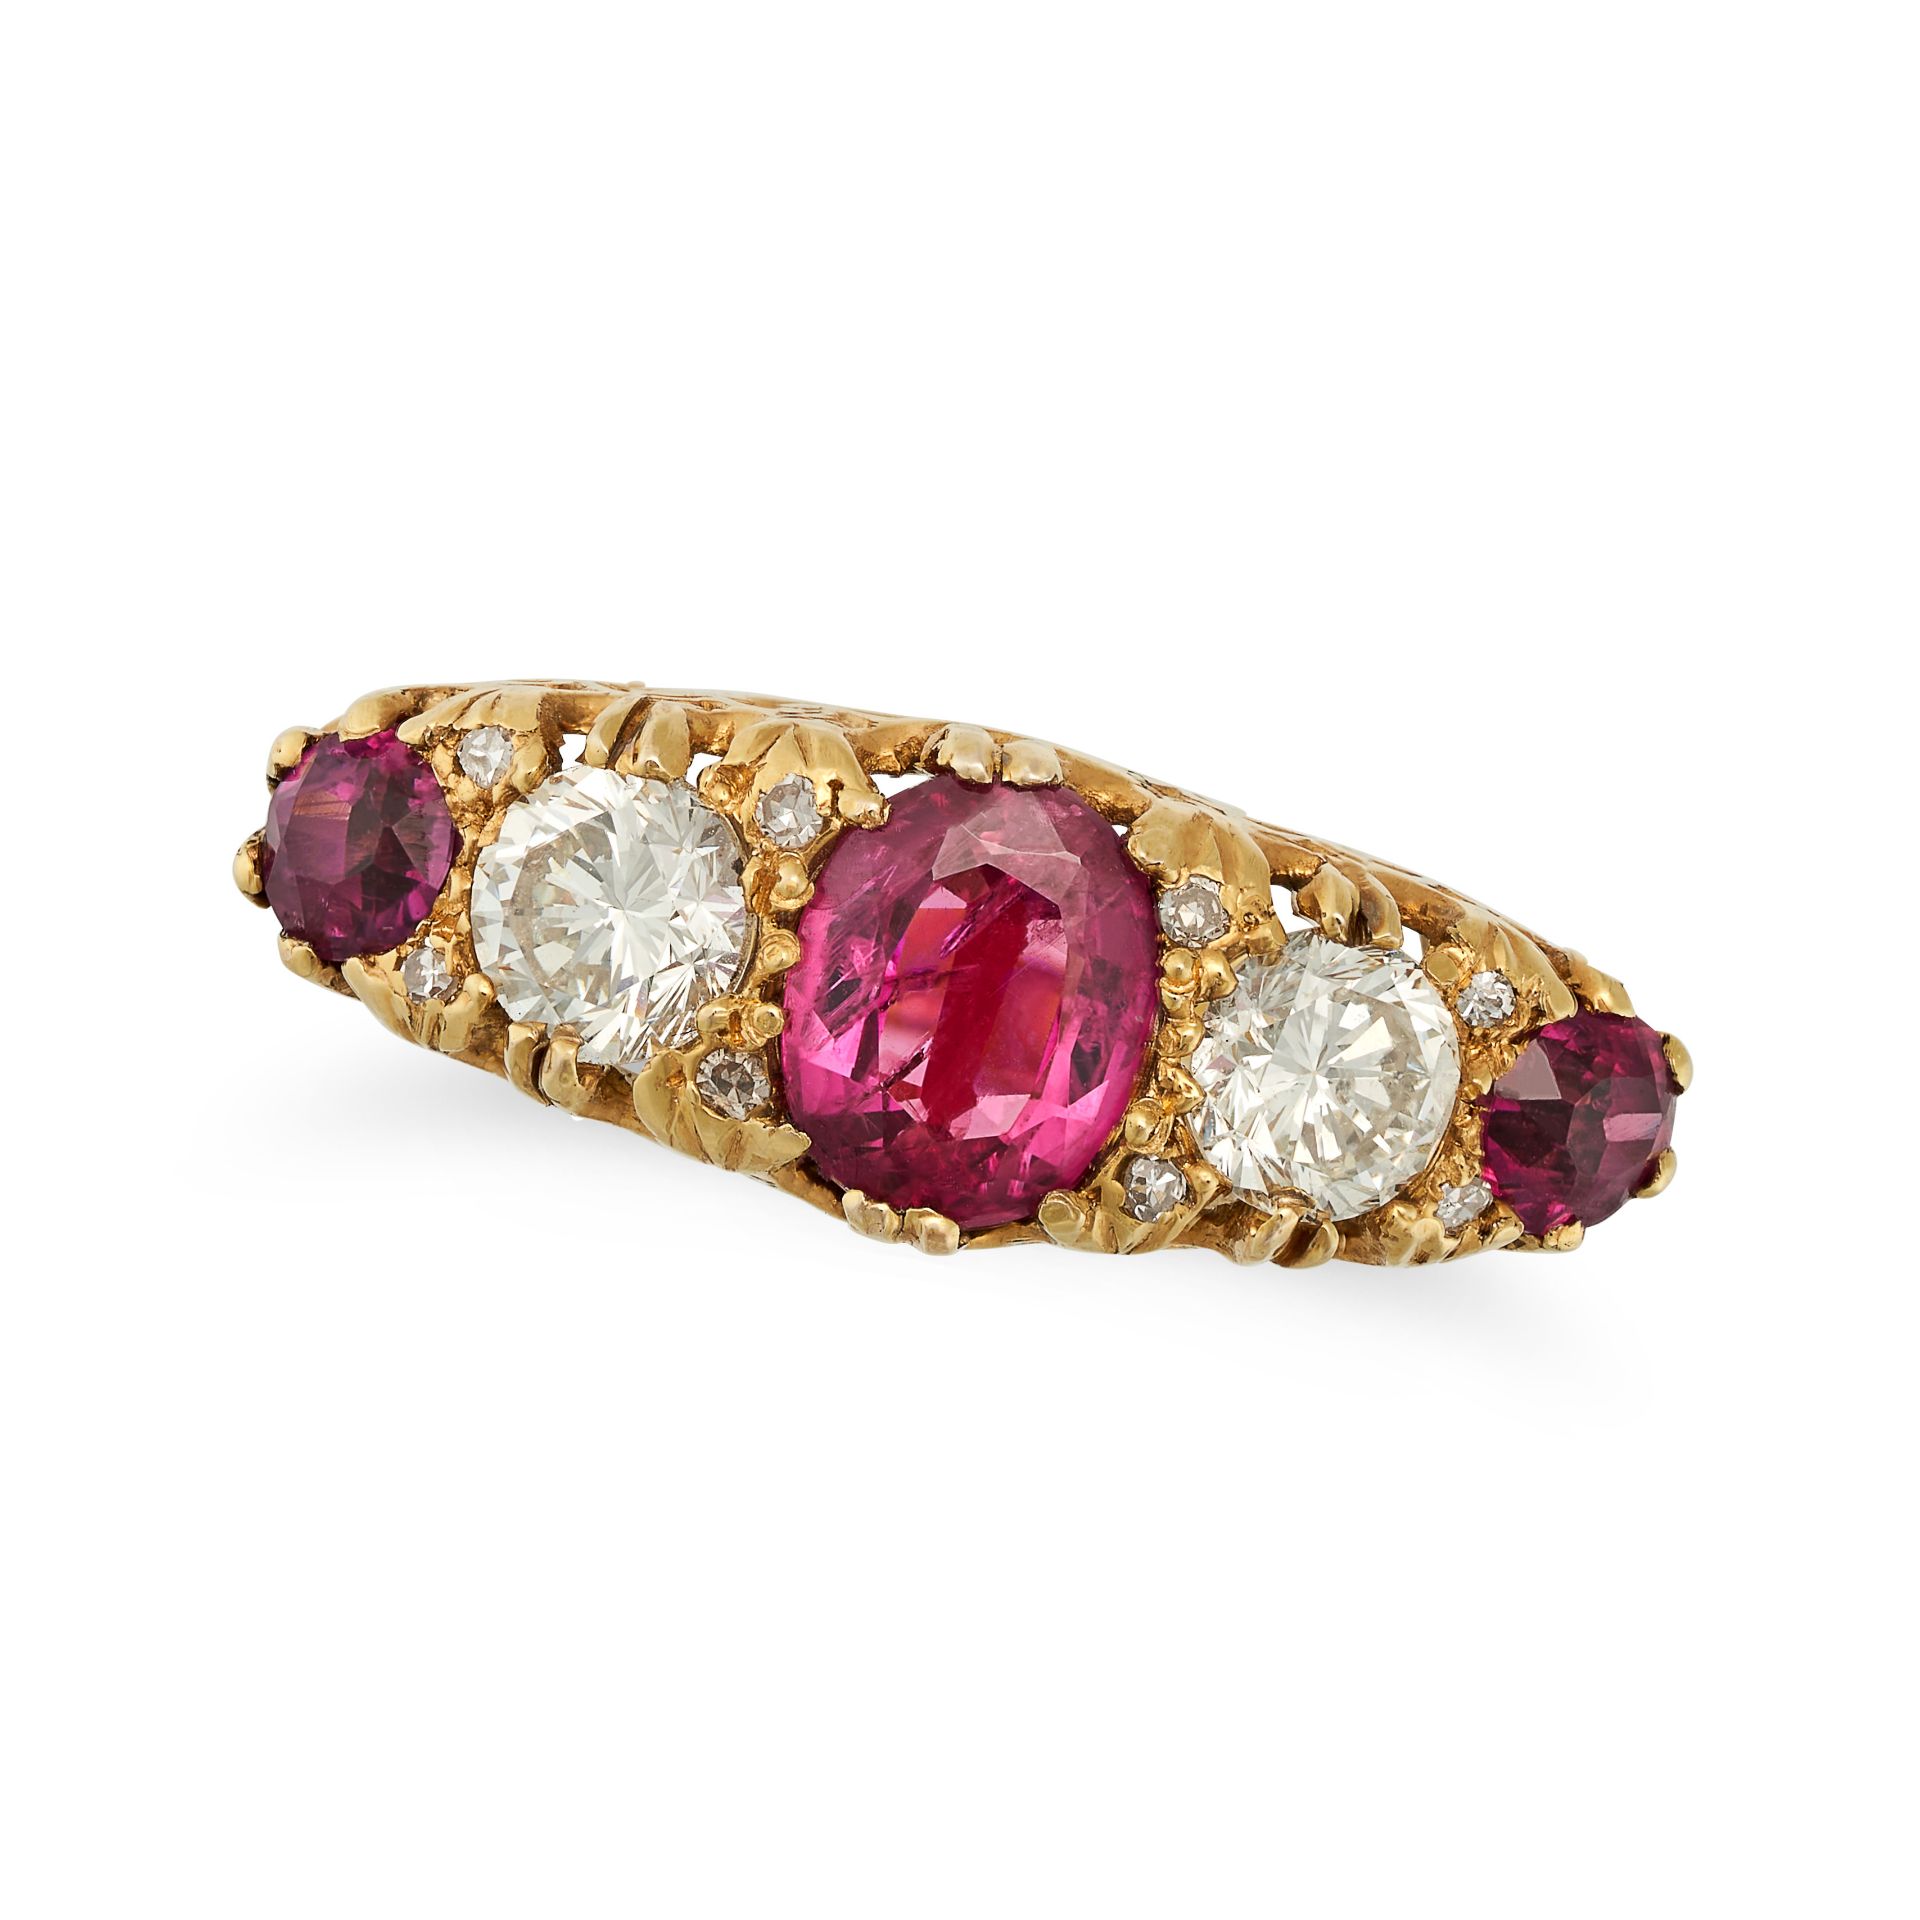 A FIVE STONE RUBY AND DIAMOND RING in yellow gold, set with cushion and round cut rubies accented...